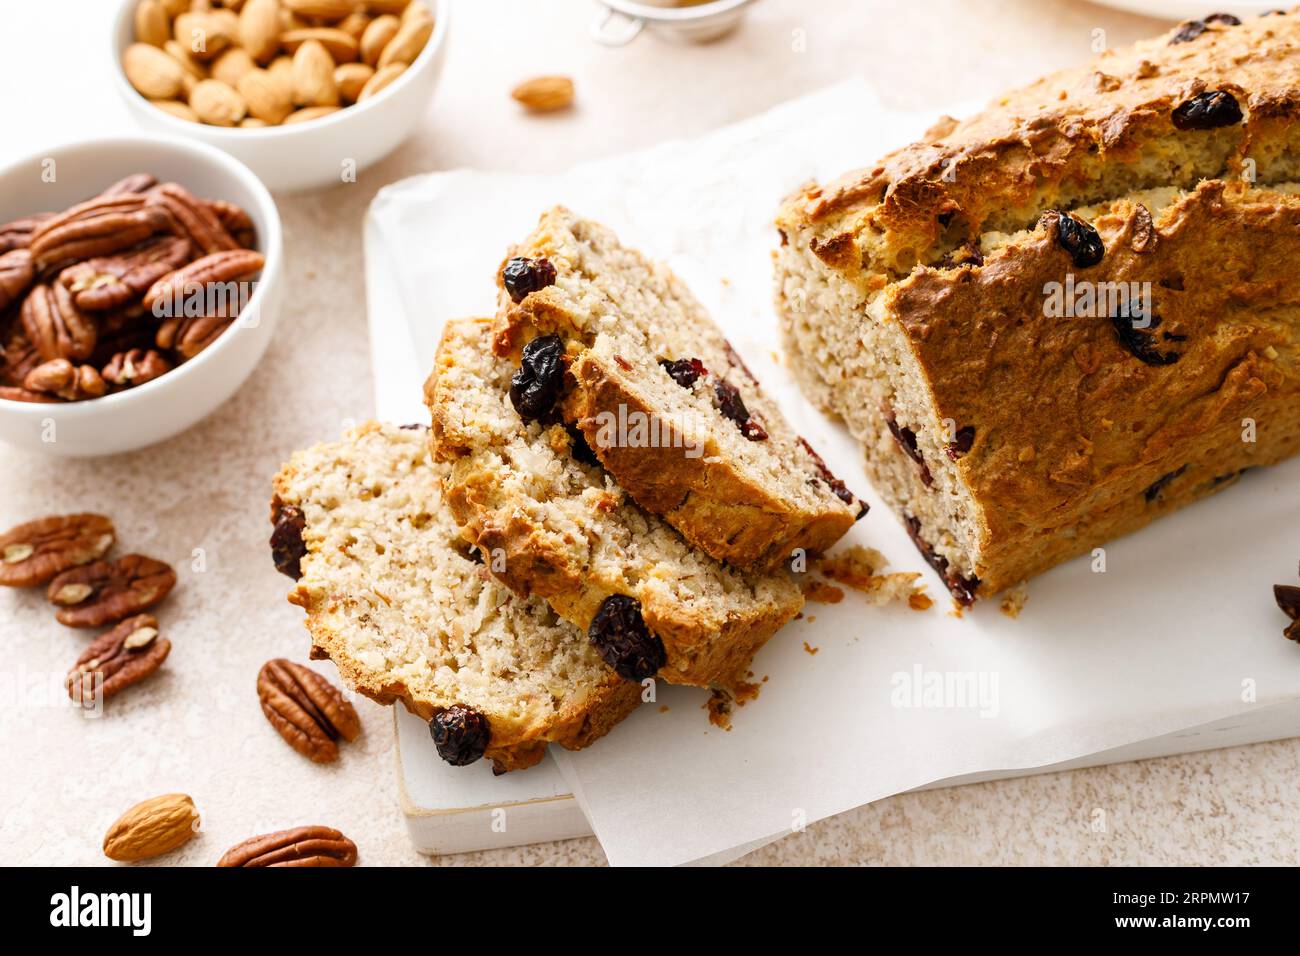 Fruitcake with cranberry, almond and pecan nuts sliced on a wooden board Stock Photo